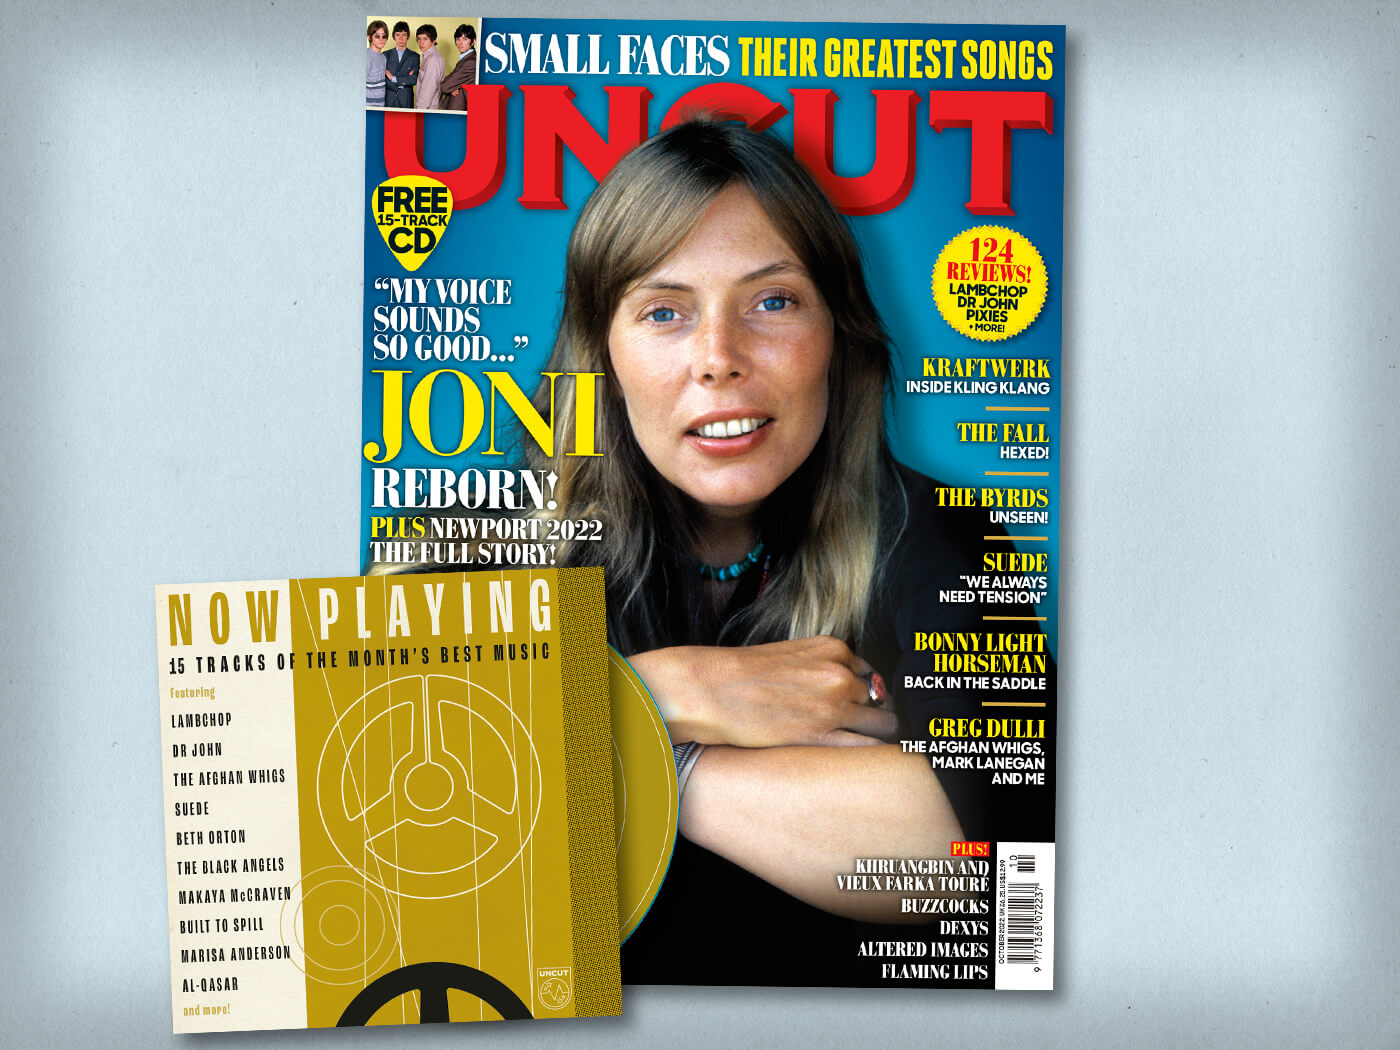 Introducing the new Uncut: Joni Mitchell, Small Faces, Kraftwerk, The Fall and more